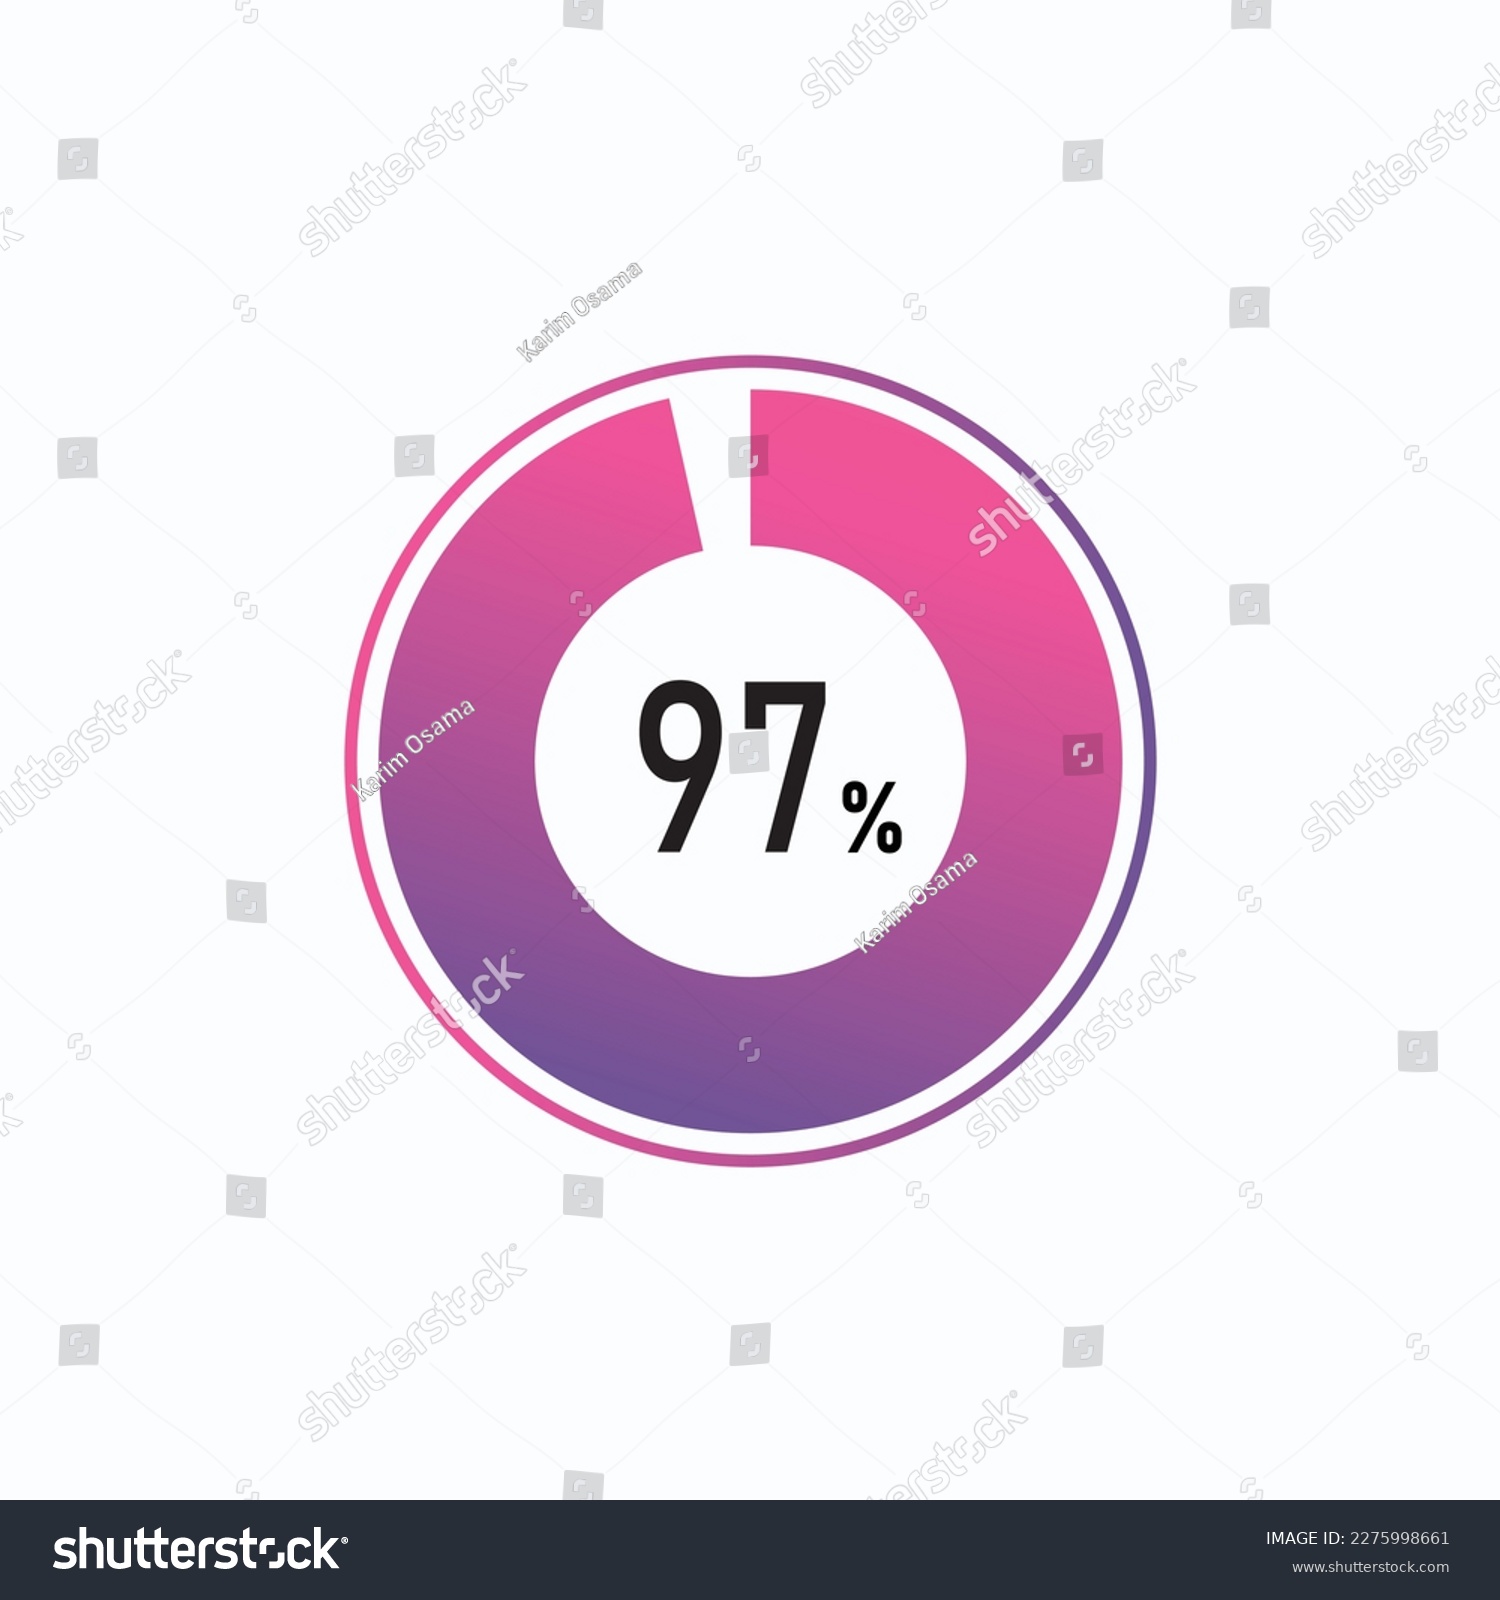 SVG of 97 percents pie chart infographic elements. 97% percentage infographic circle icons for download, illustration, business, web design. svg